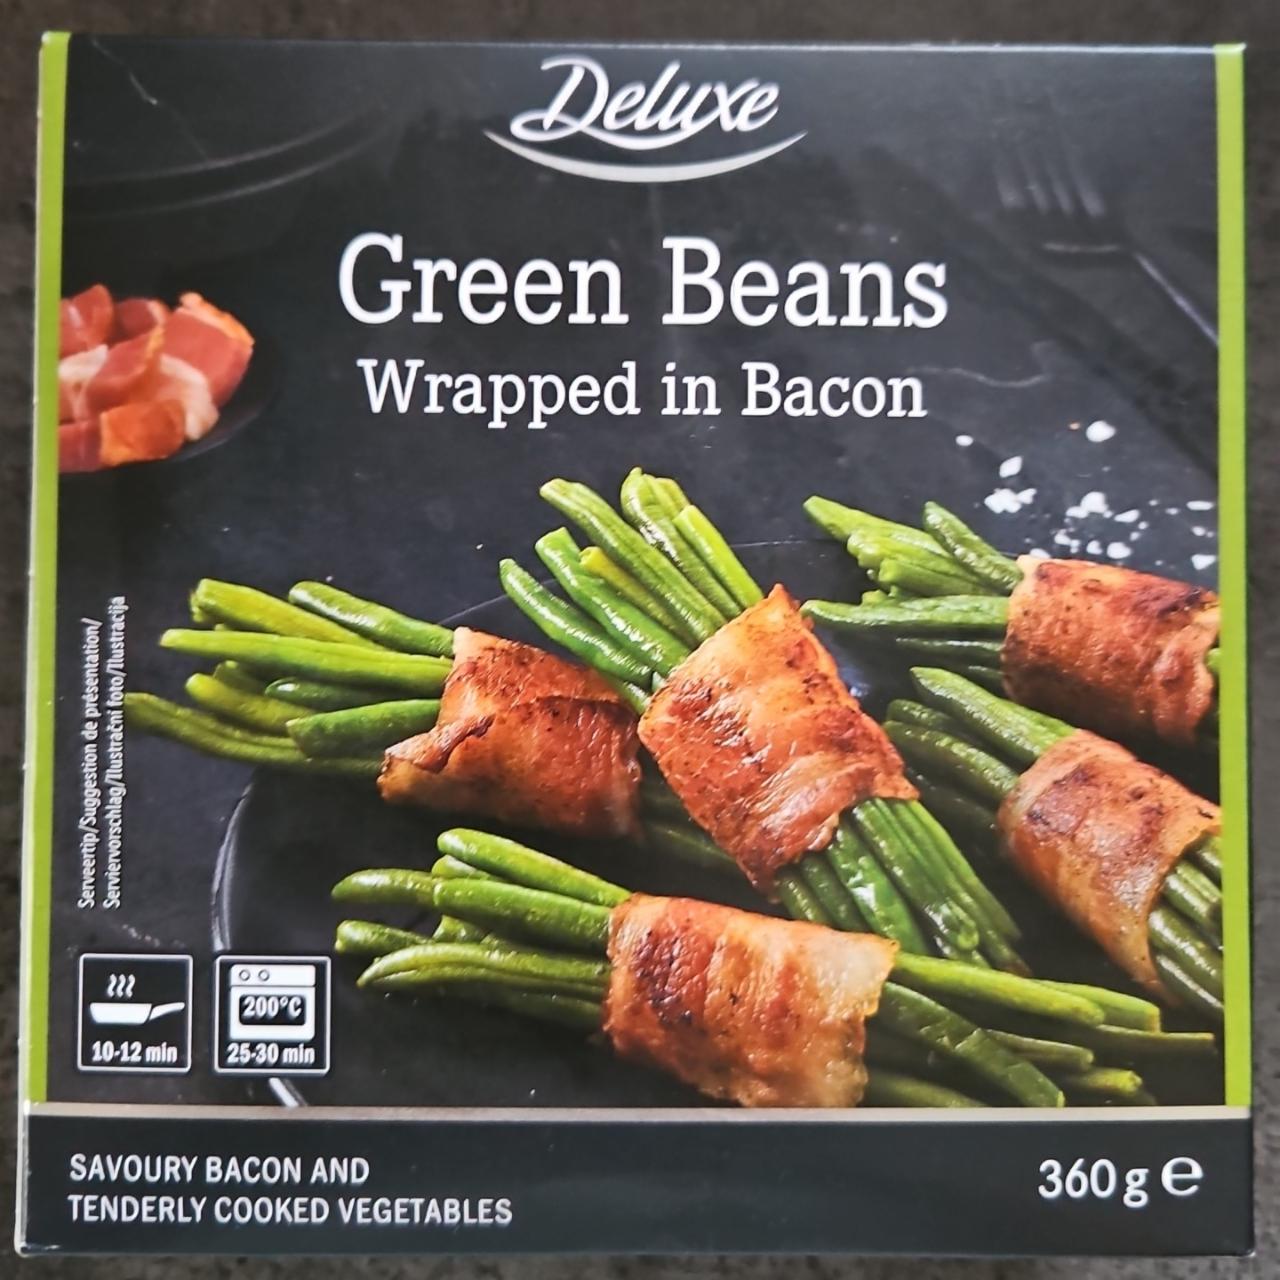 Fotografie - Green Beans Wrapped in Bacon Deluxe